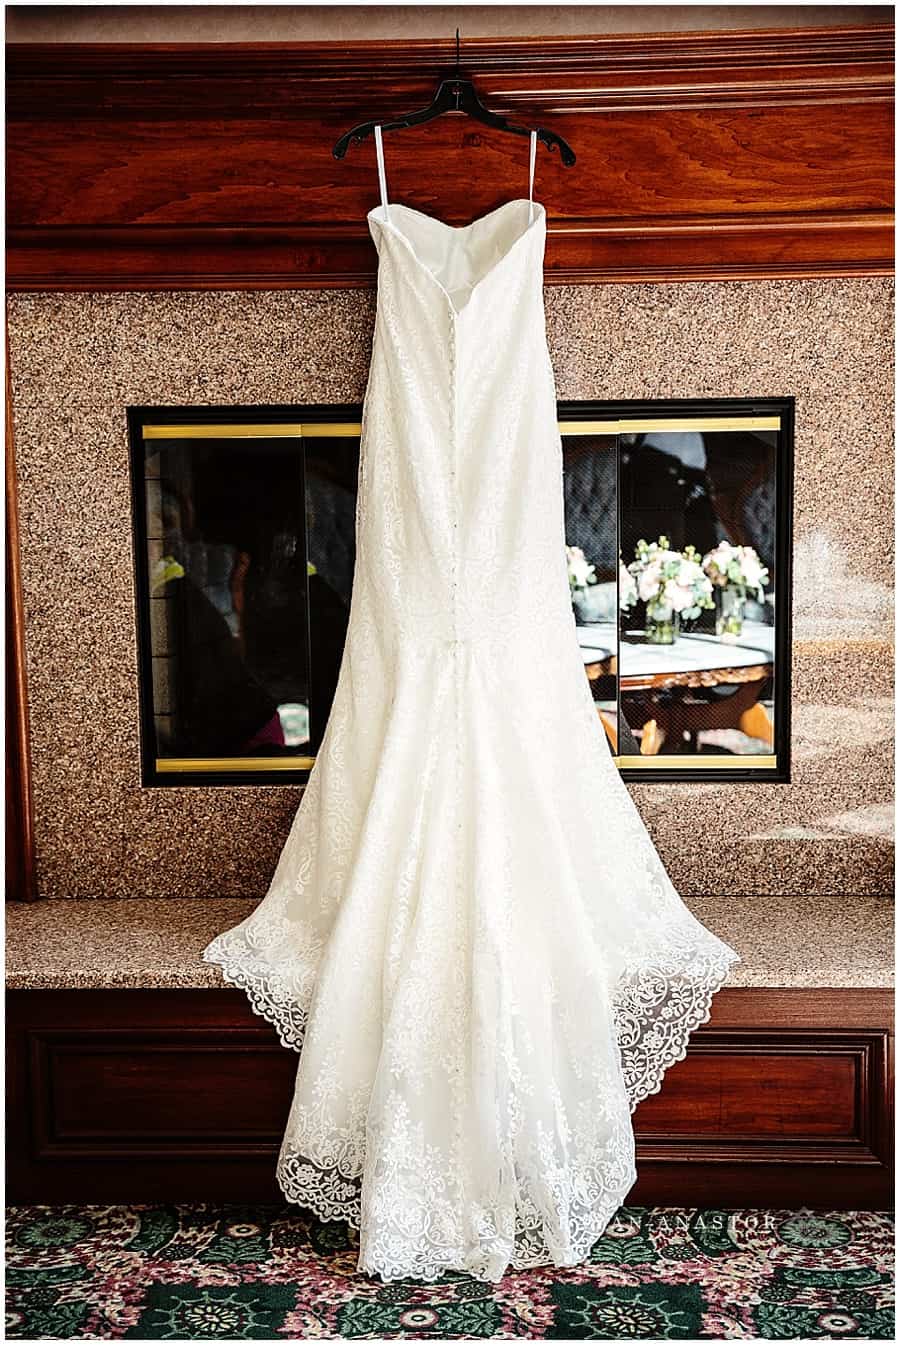 wedding gown at fire place